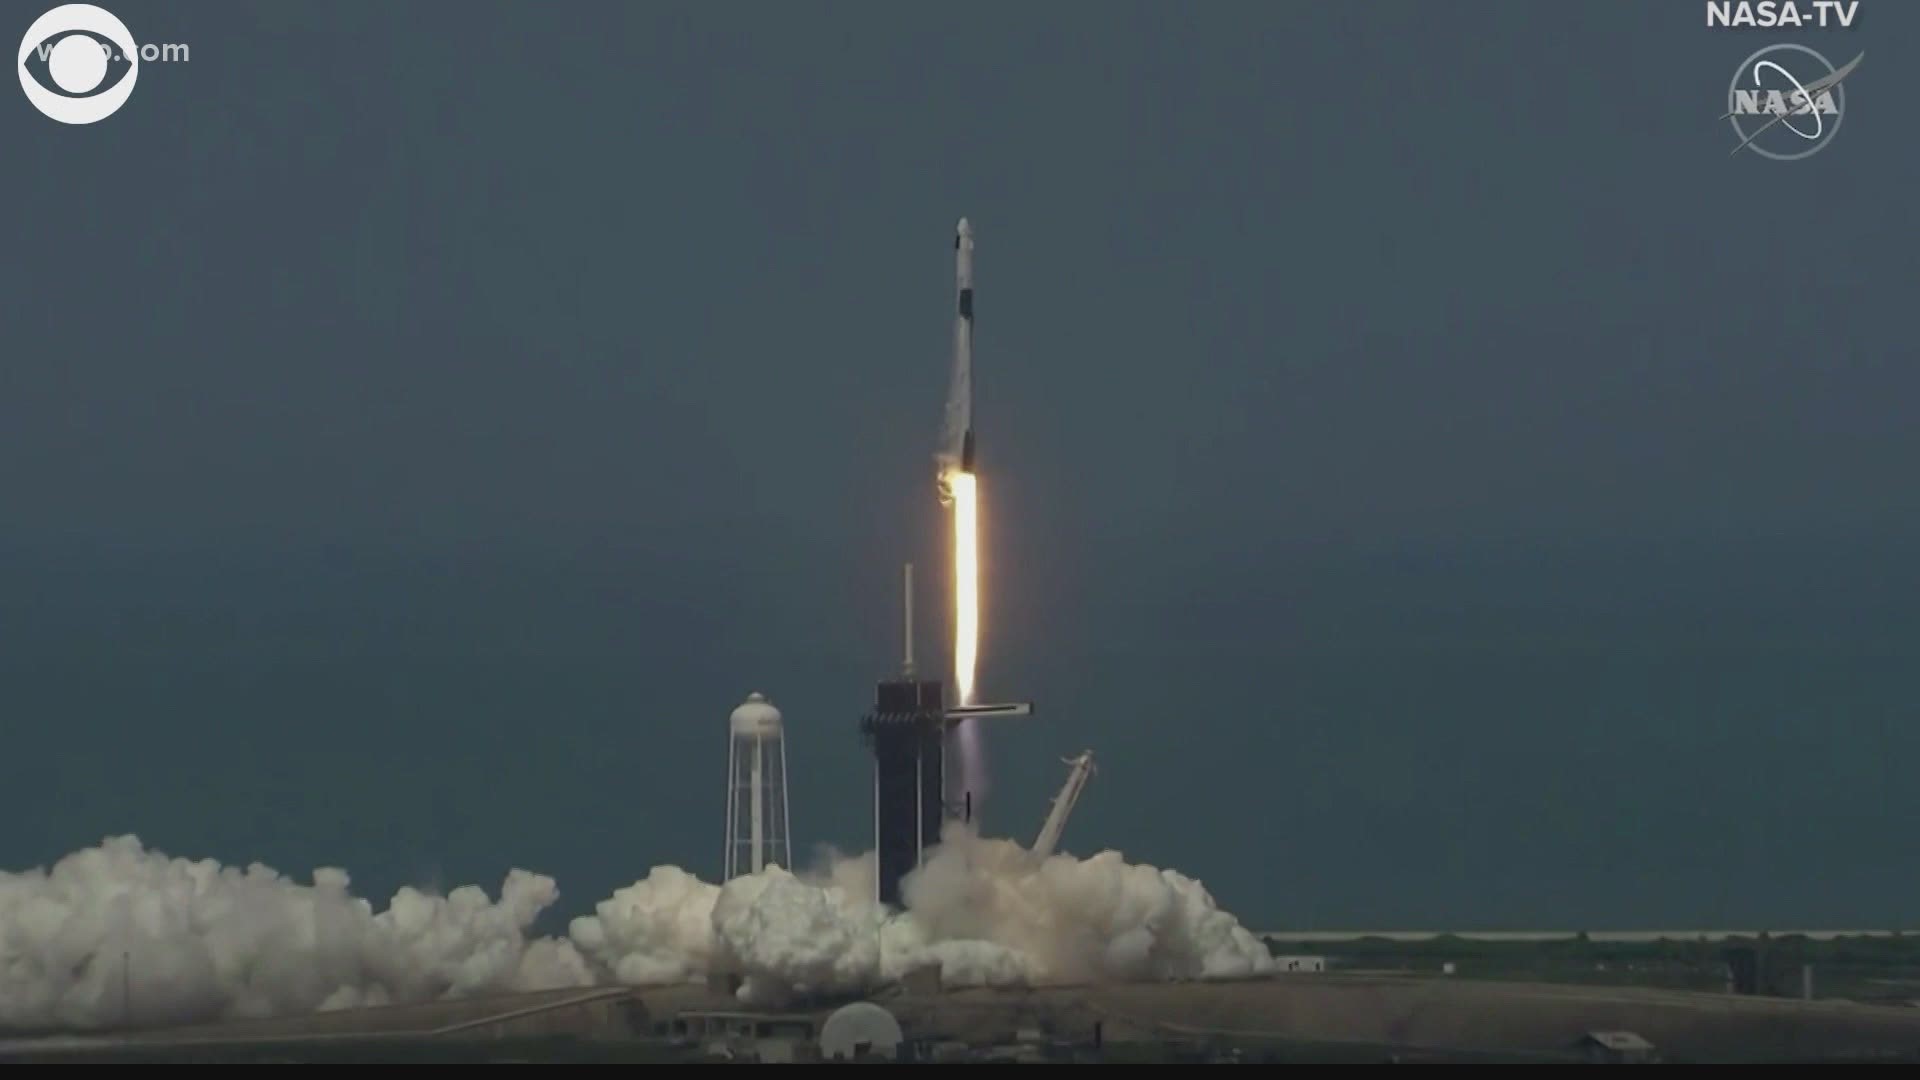 Today's launch was the first time a privately-owned rocket flew American astronauts into space.